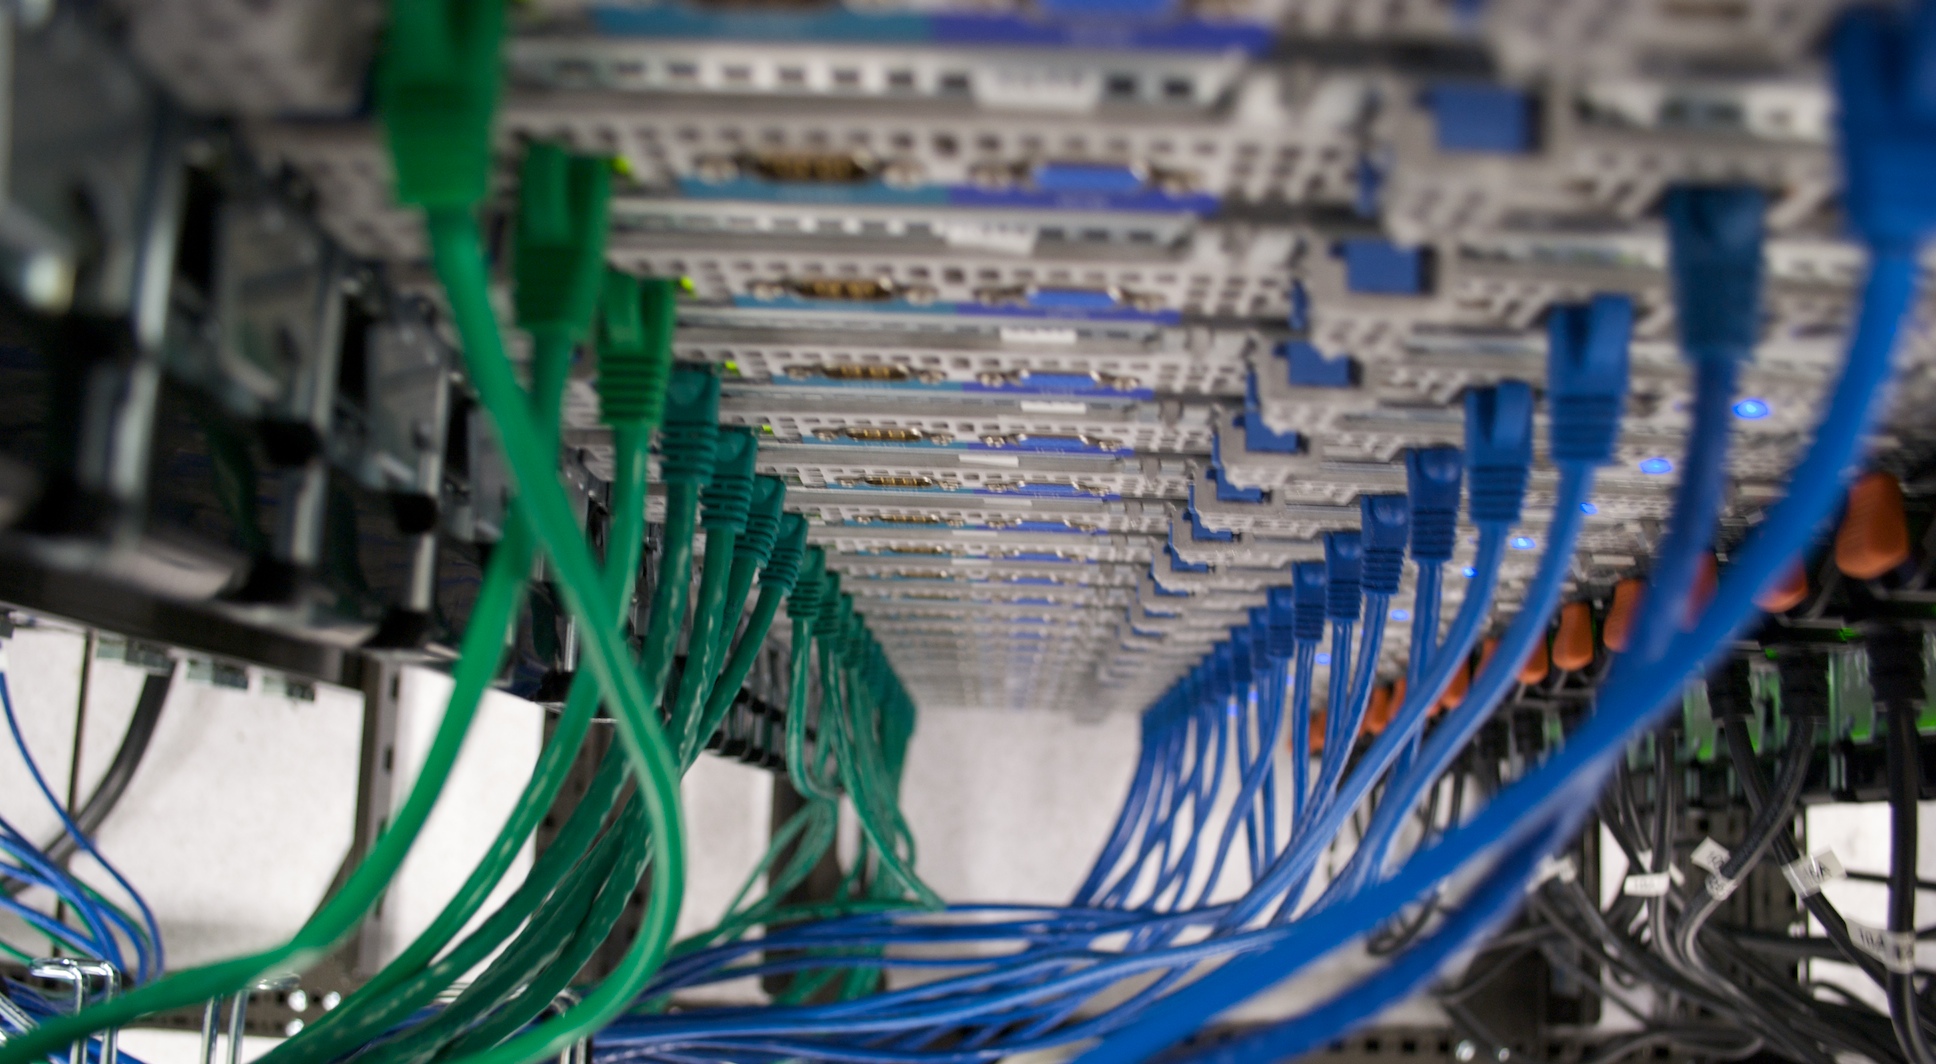 Voice Over IP Cabling